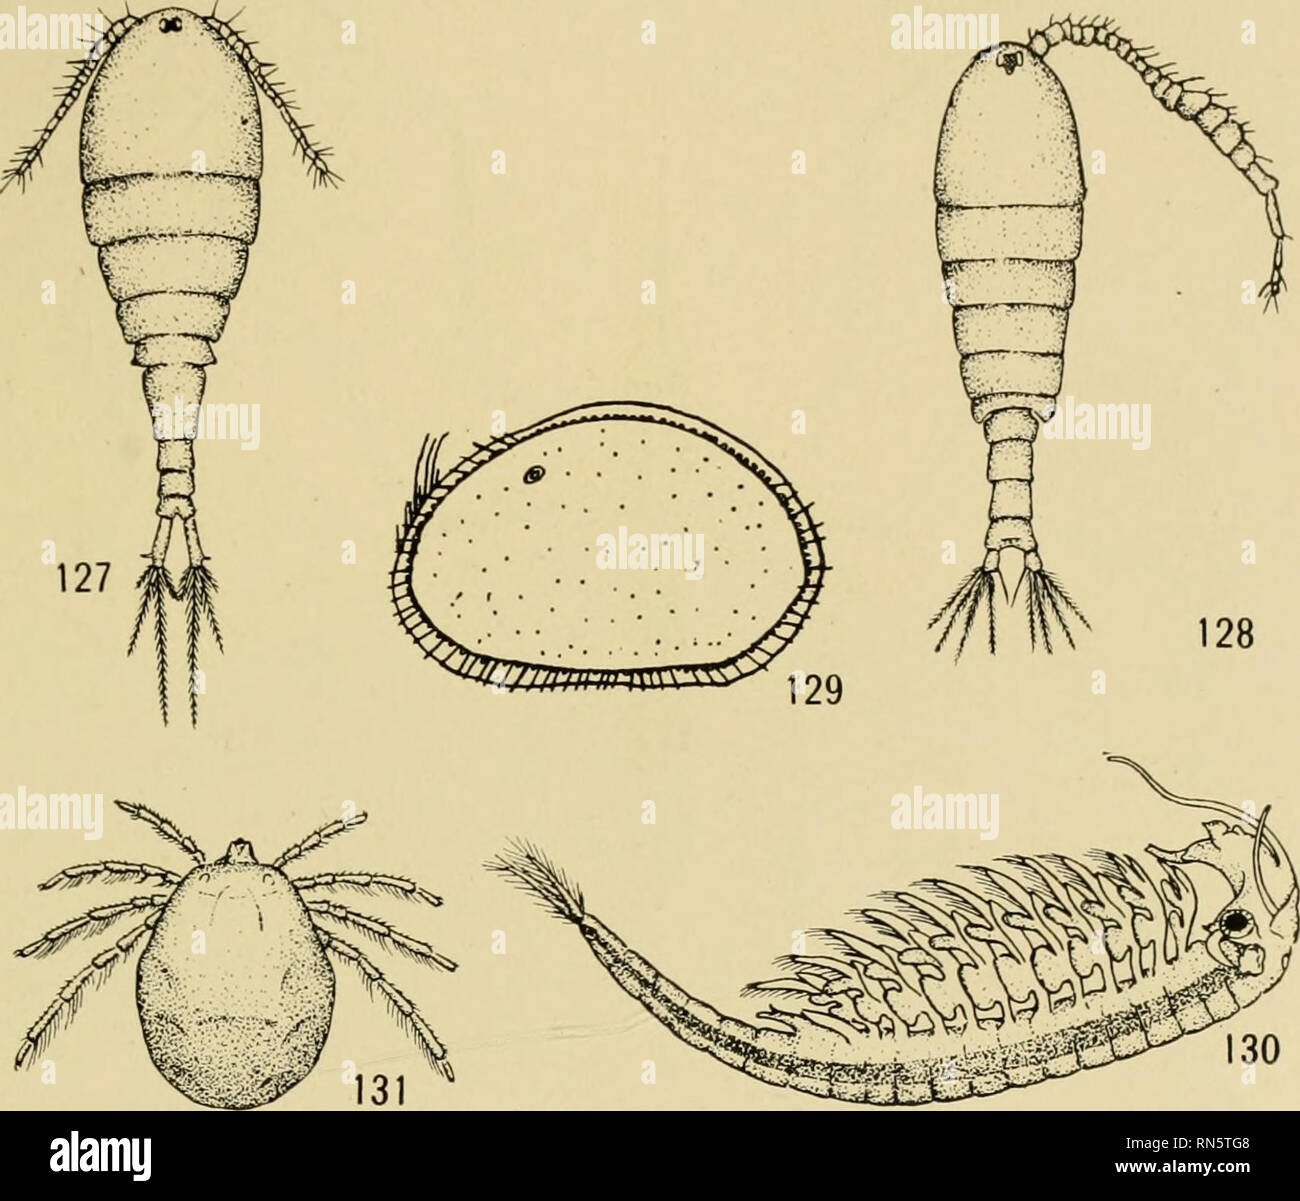 . Animal communities in temperate America, as illustrated in the Chicago region ; a study in animal ecology. Animal ecology; Zoology. TEMPORARY POND COMMUNITIES 177 the ostraccd {Cyprois marg'niata )(i47) (Fig. 129), and the i-airy shrimp (Eubranchipus) (148) (Fig. 130), all of which are characteristic of tempo- rary ponds. Red mites (Fig. 131) are also common (149). Professor Child (unpublished) has noted that the distribution each spring of Eubranchipus and of other temporary pond species is modified. Temporary Grassy Pond Animals Fig. 127.—A temporary pond copepod {Cyclops viridis amcricanu Stock Photo